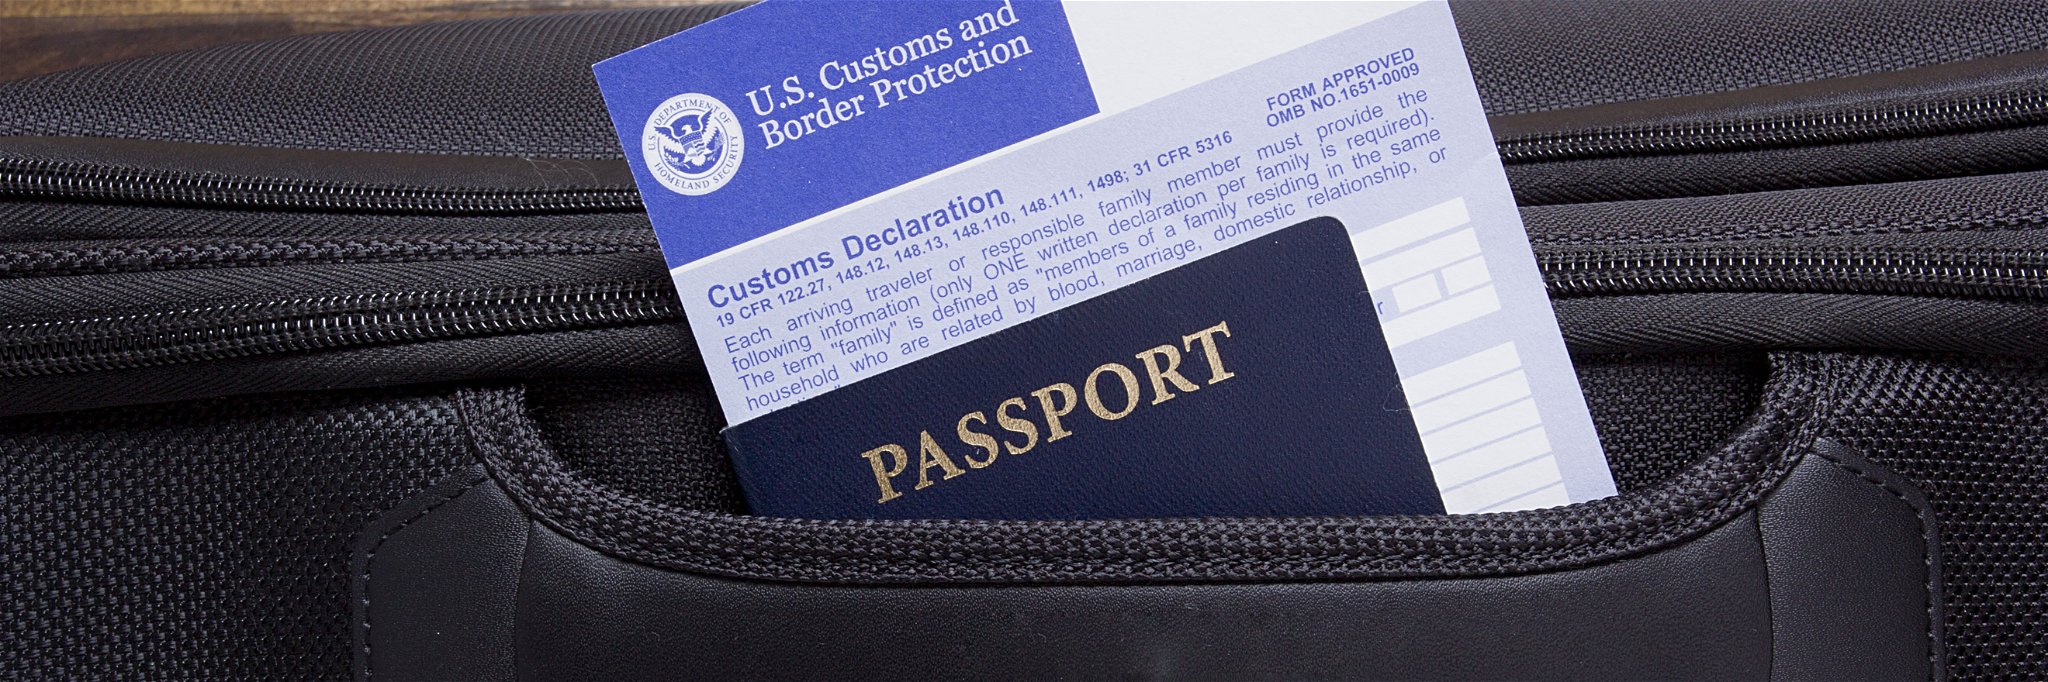 From April 11,&nbsp;US&nbsp;citizens can select "X" as the gender marker on their passport application.&nbsp;